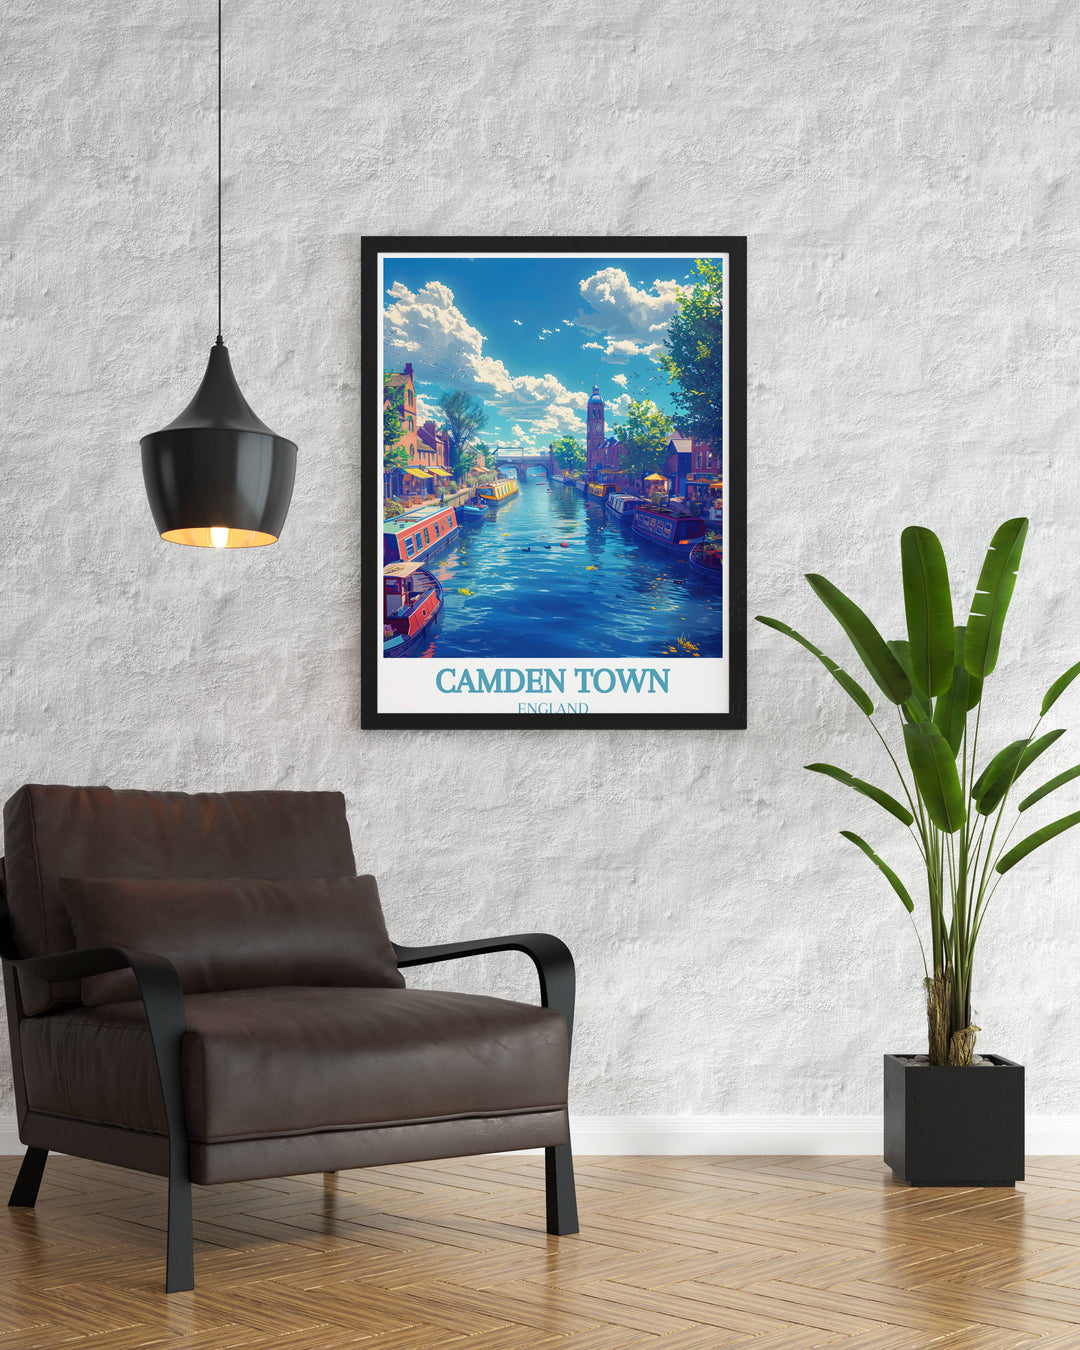 Camden Lock travel poster featuring the famous Camden Lock Bridge and the energetic atmosphere of Camden Town London an excellent gift for those who admire vintage travel prints and the vibrant culture of London.